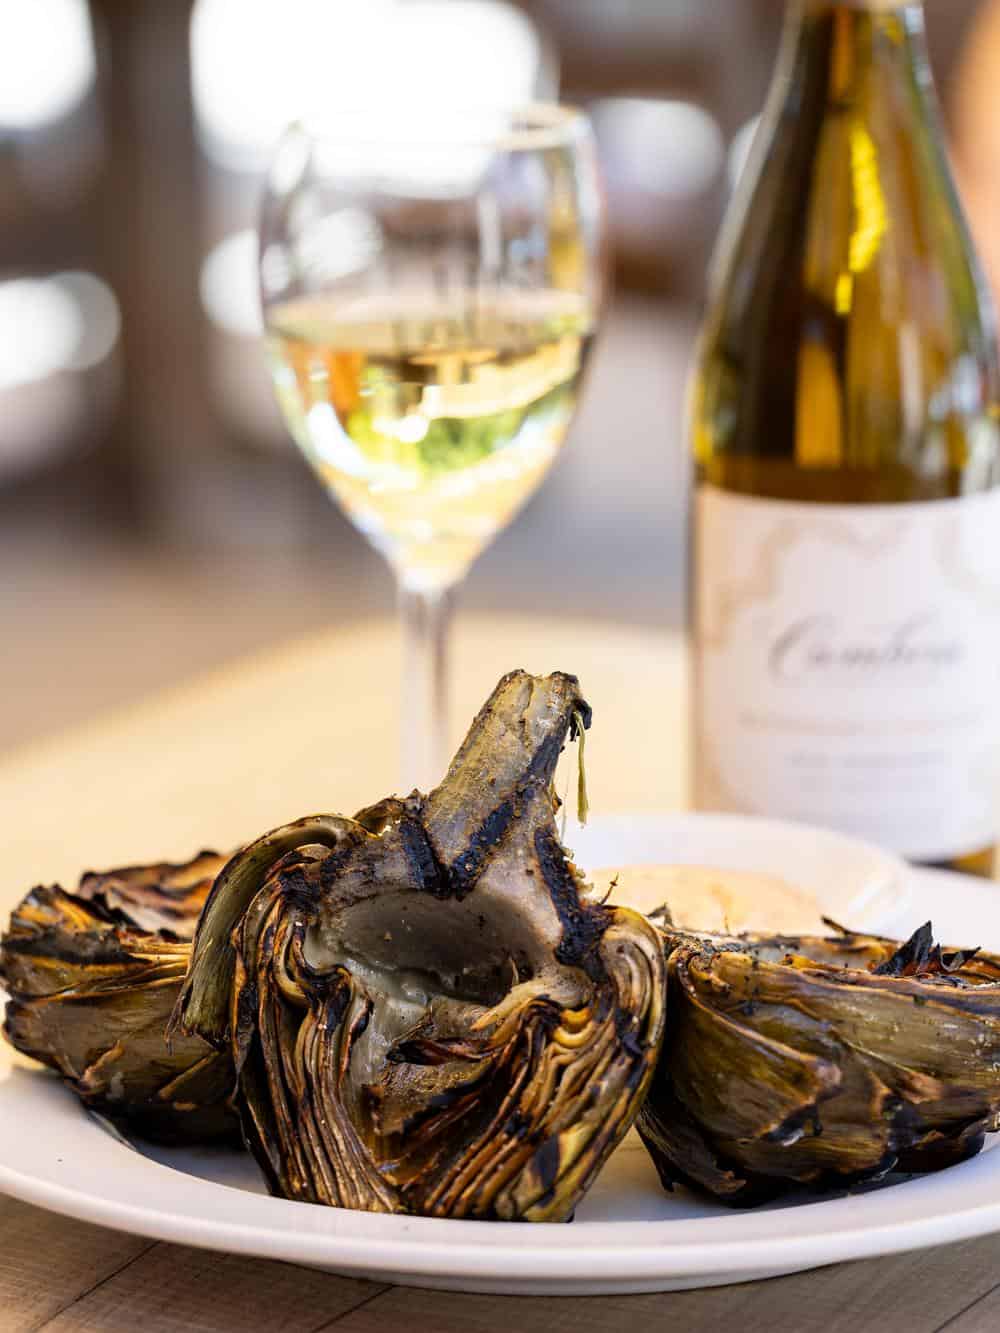 Grilled Castroville artichoke with mustard dipping sauce and a glass of white wine